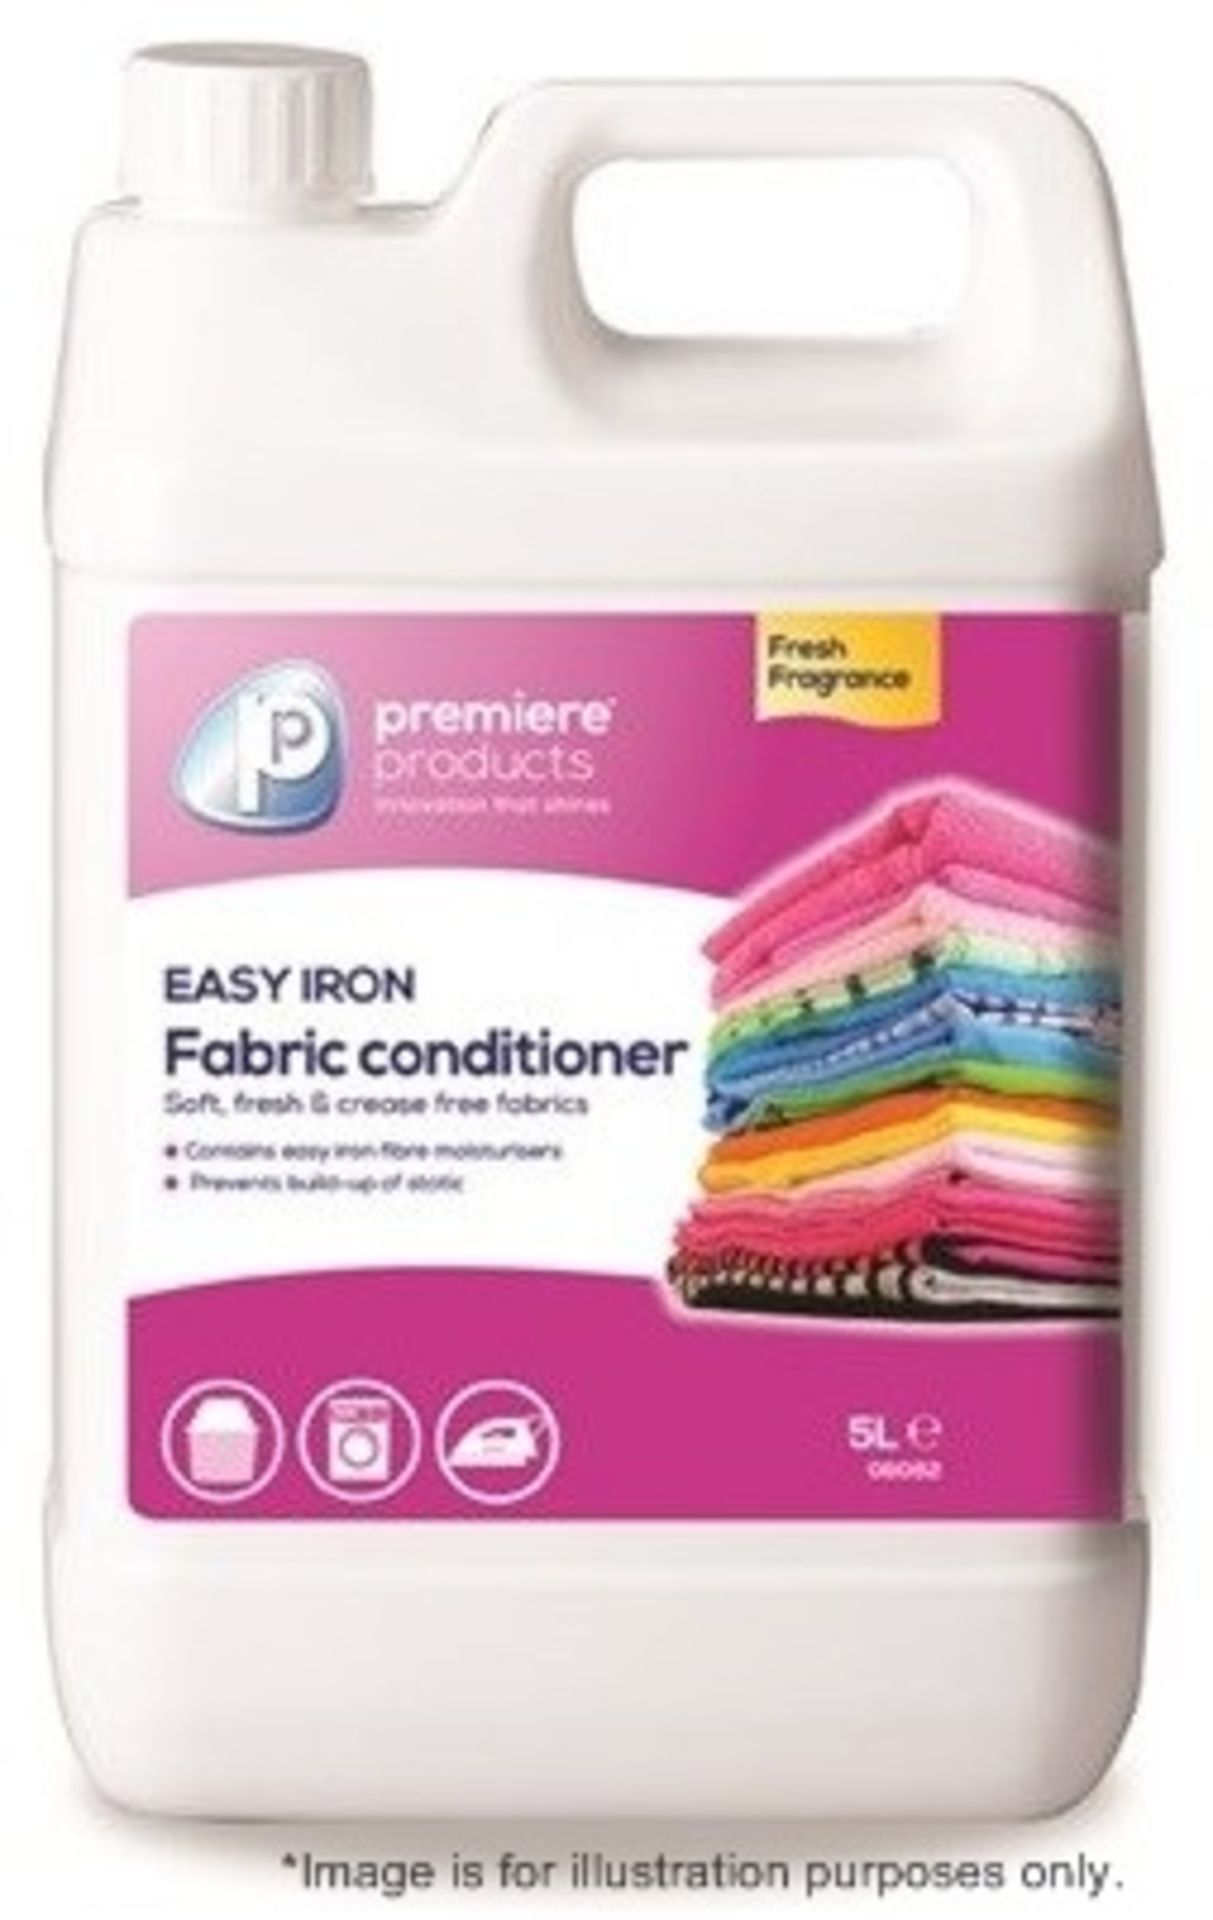 2 x 5ltr Premiere Products Easy Iron fabric conditioner - New Boxed Stock - CL083 - Ref 08062 -